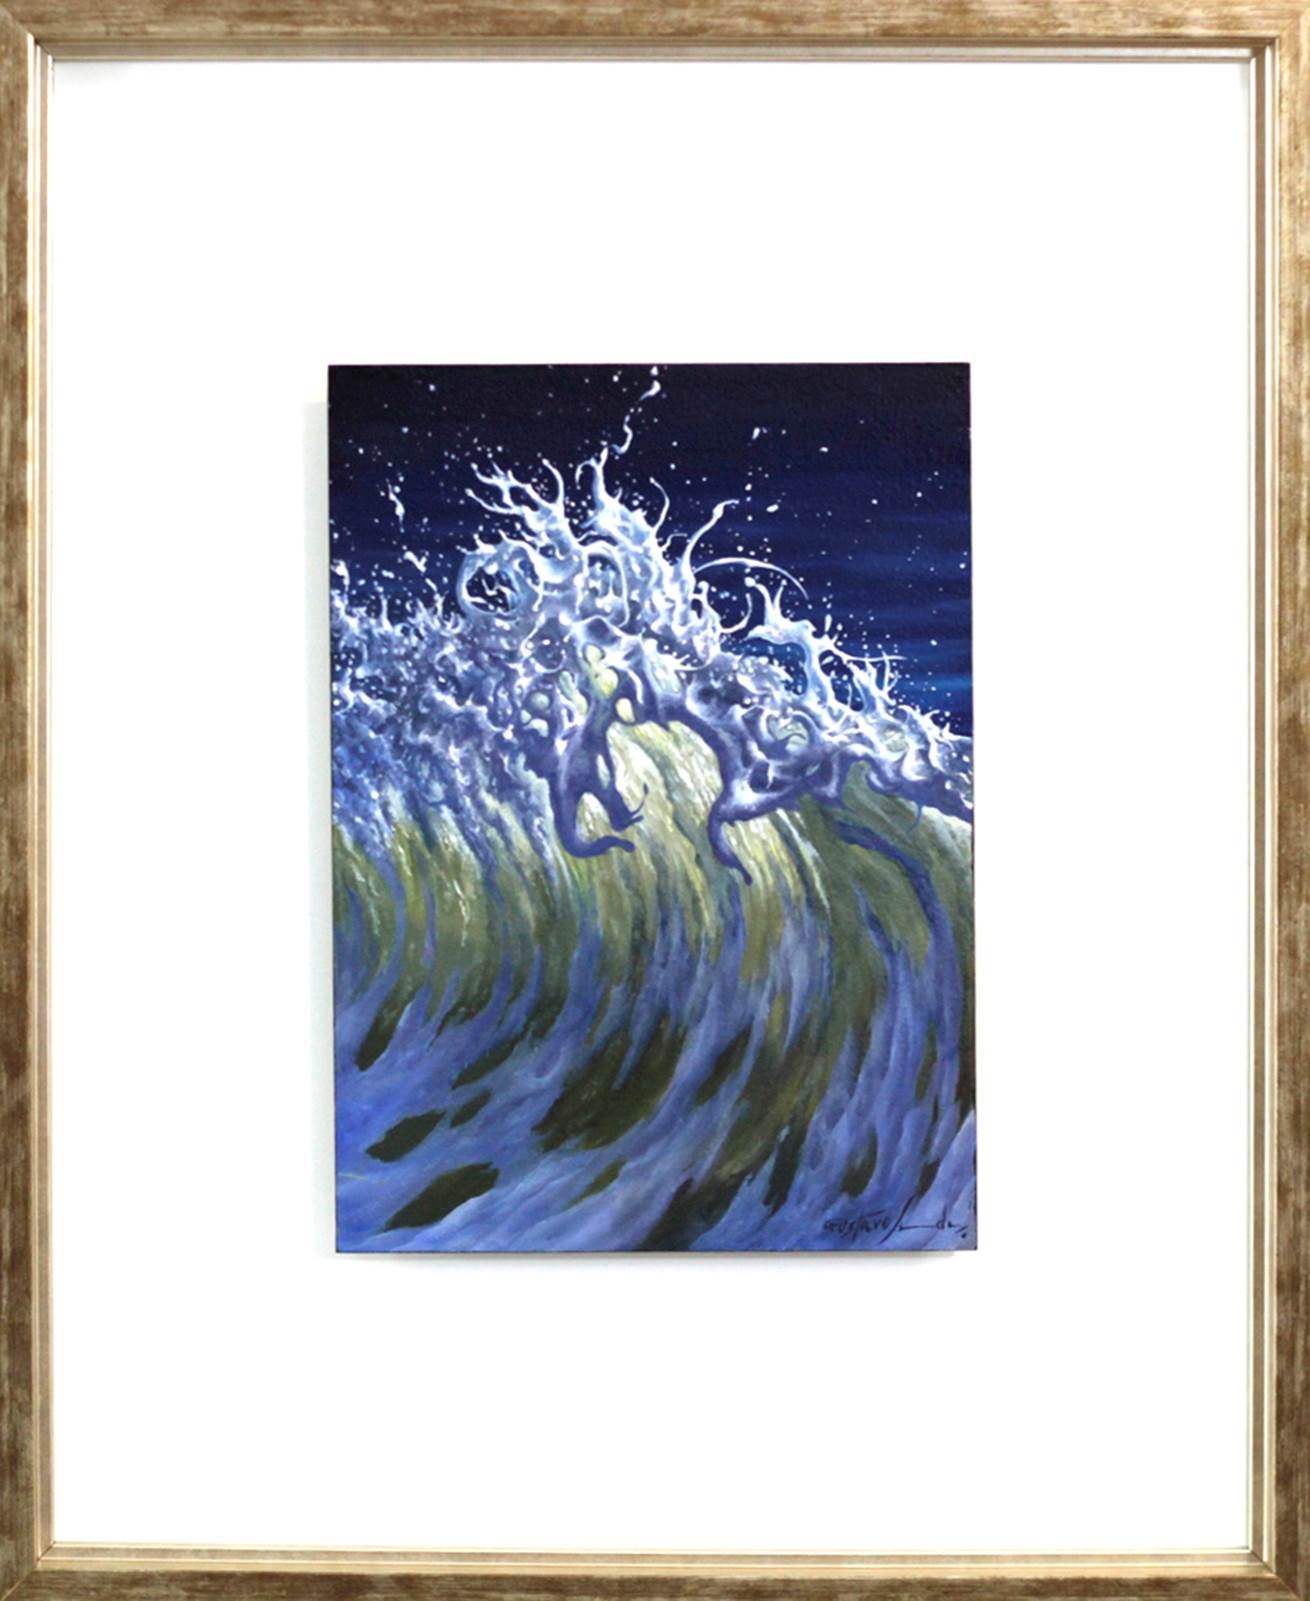 Oceano pacífico III, original Nature Oil Painting by Gustavo Fernandes